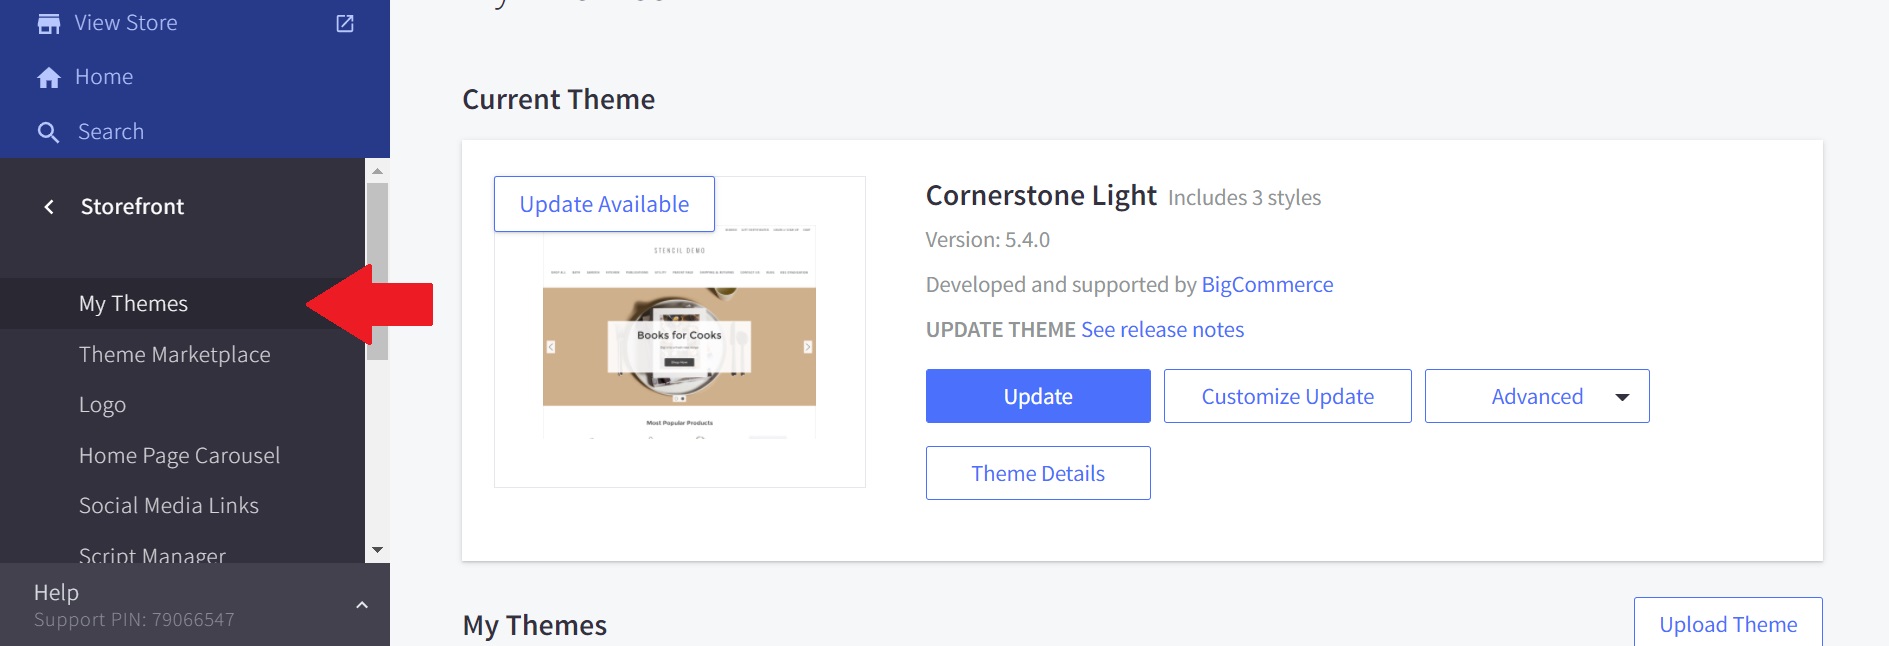 BigCommerce My Themes page